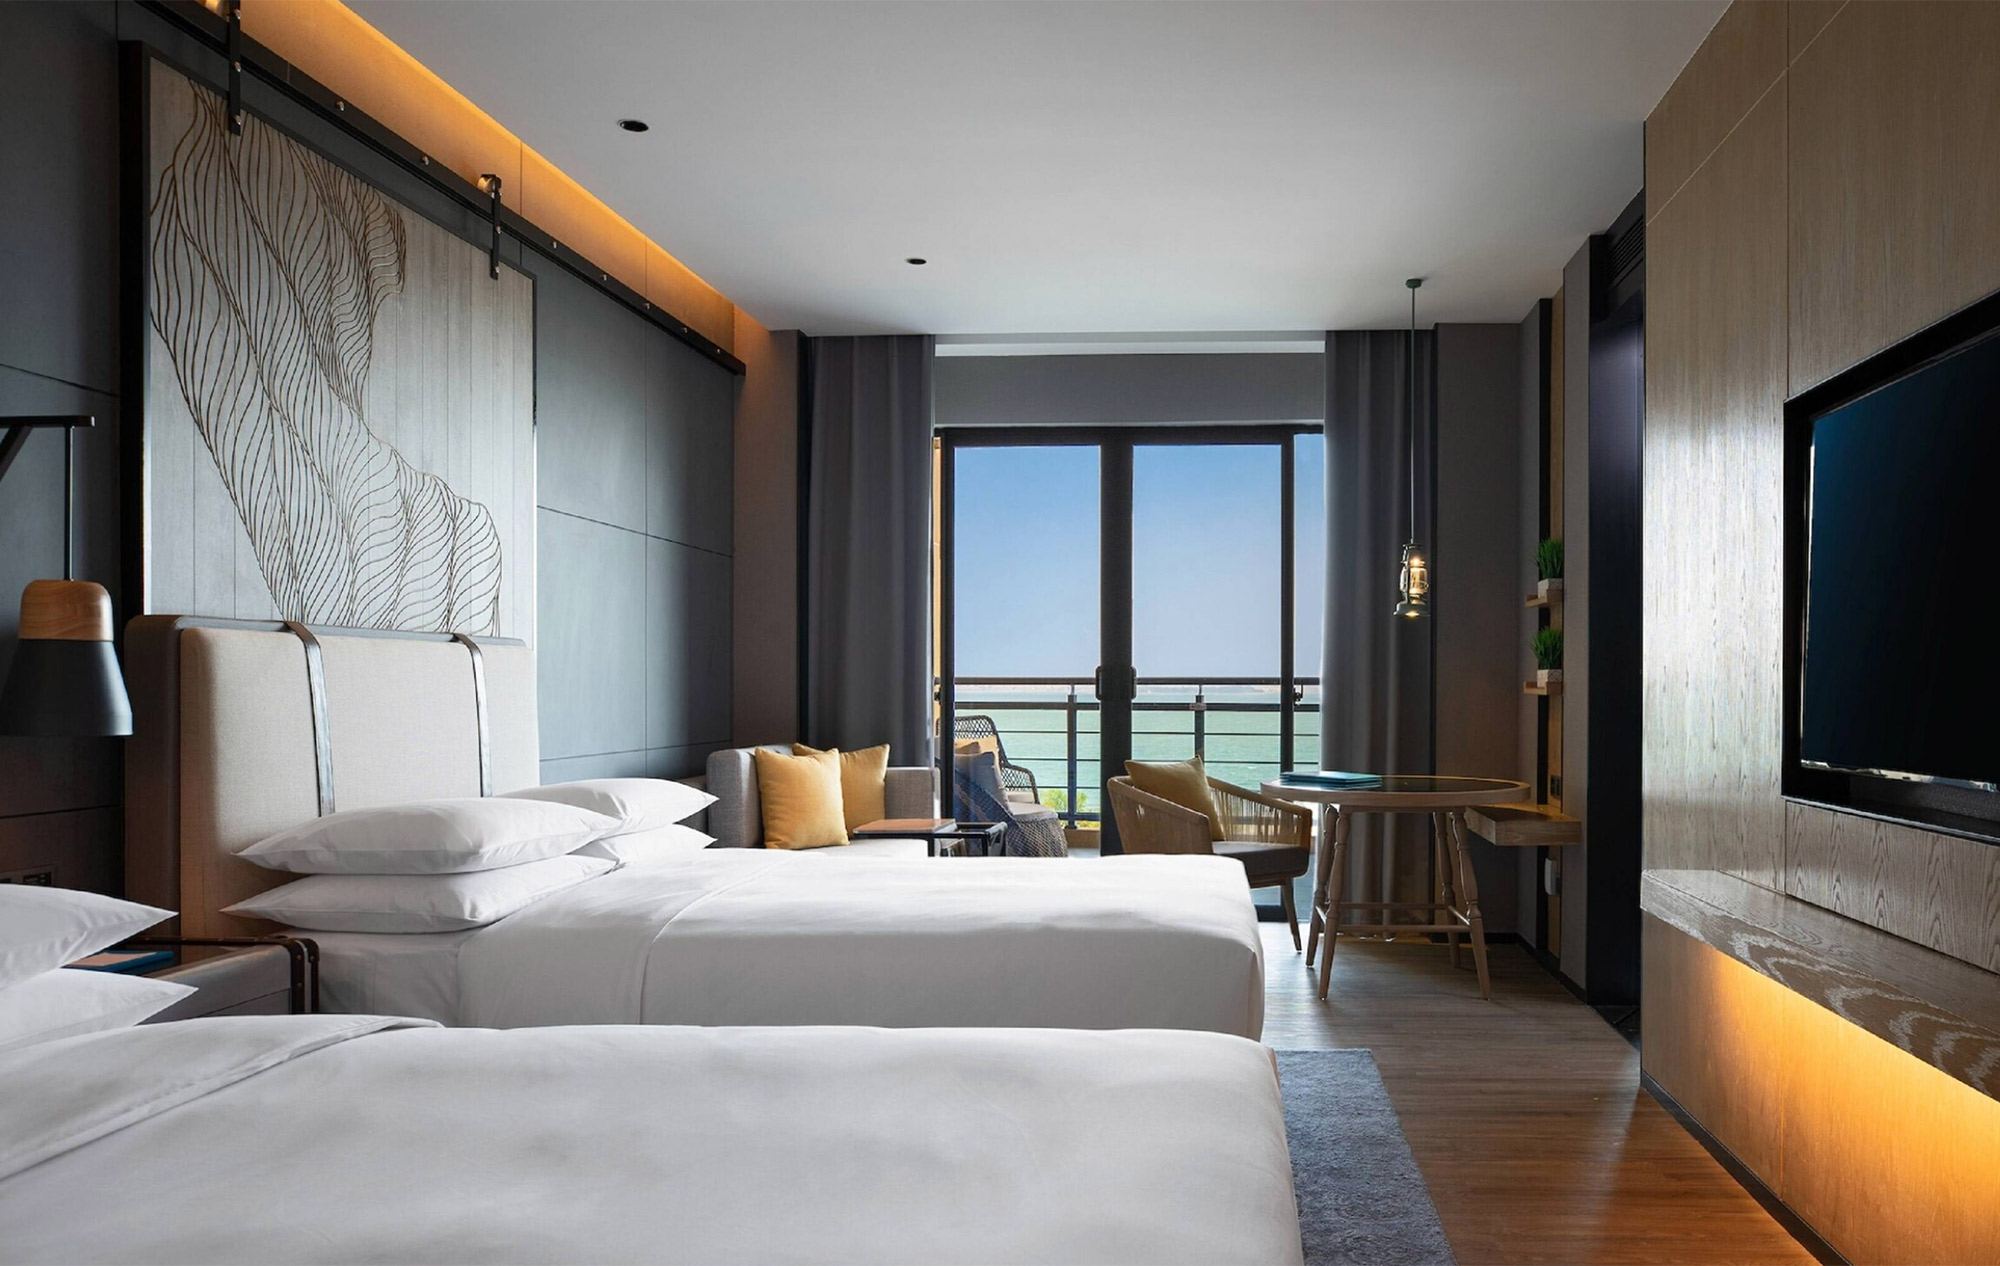 Double oceanfront room interior at the Renaissance Xiamen in southern China